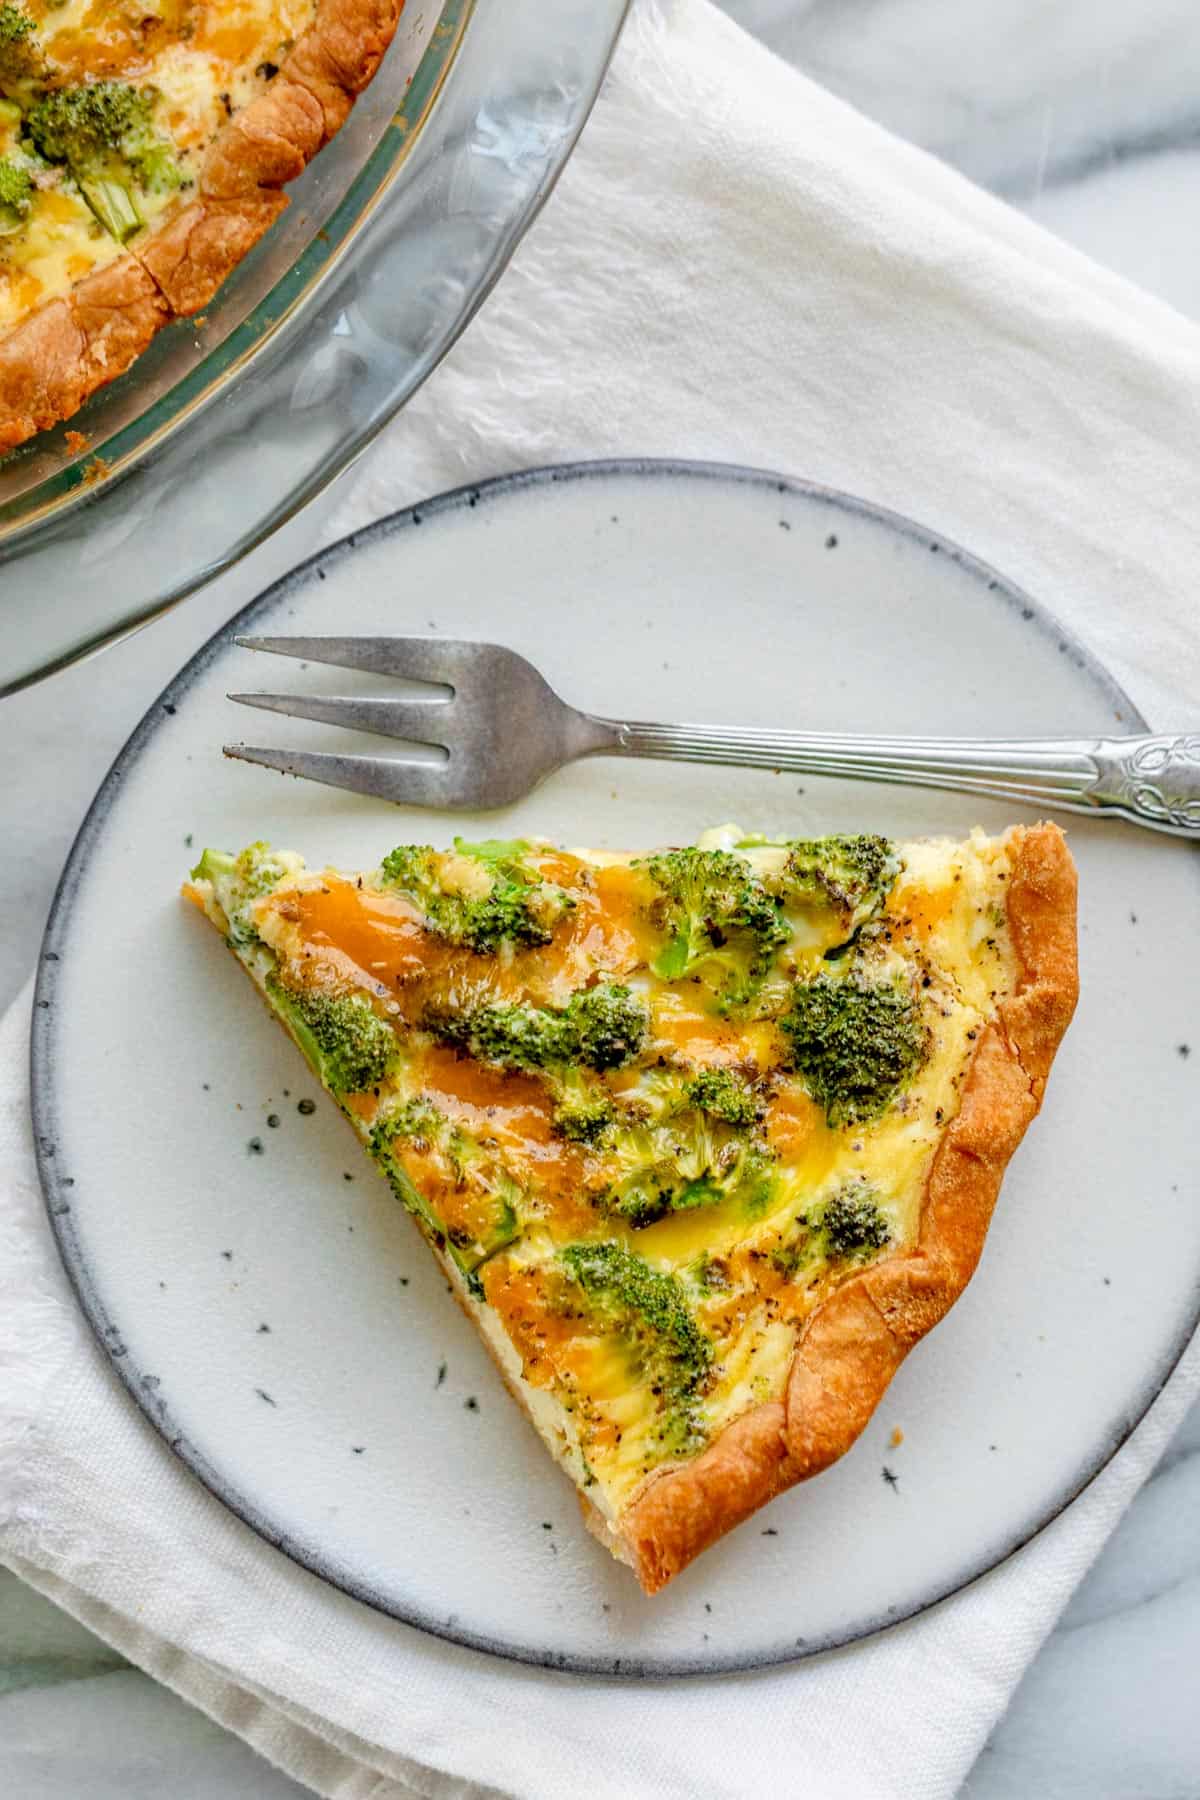 One slice of broccoli and cheese quiche on small plate with fork on the side